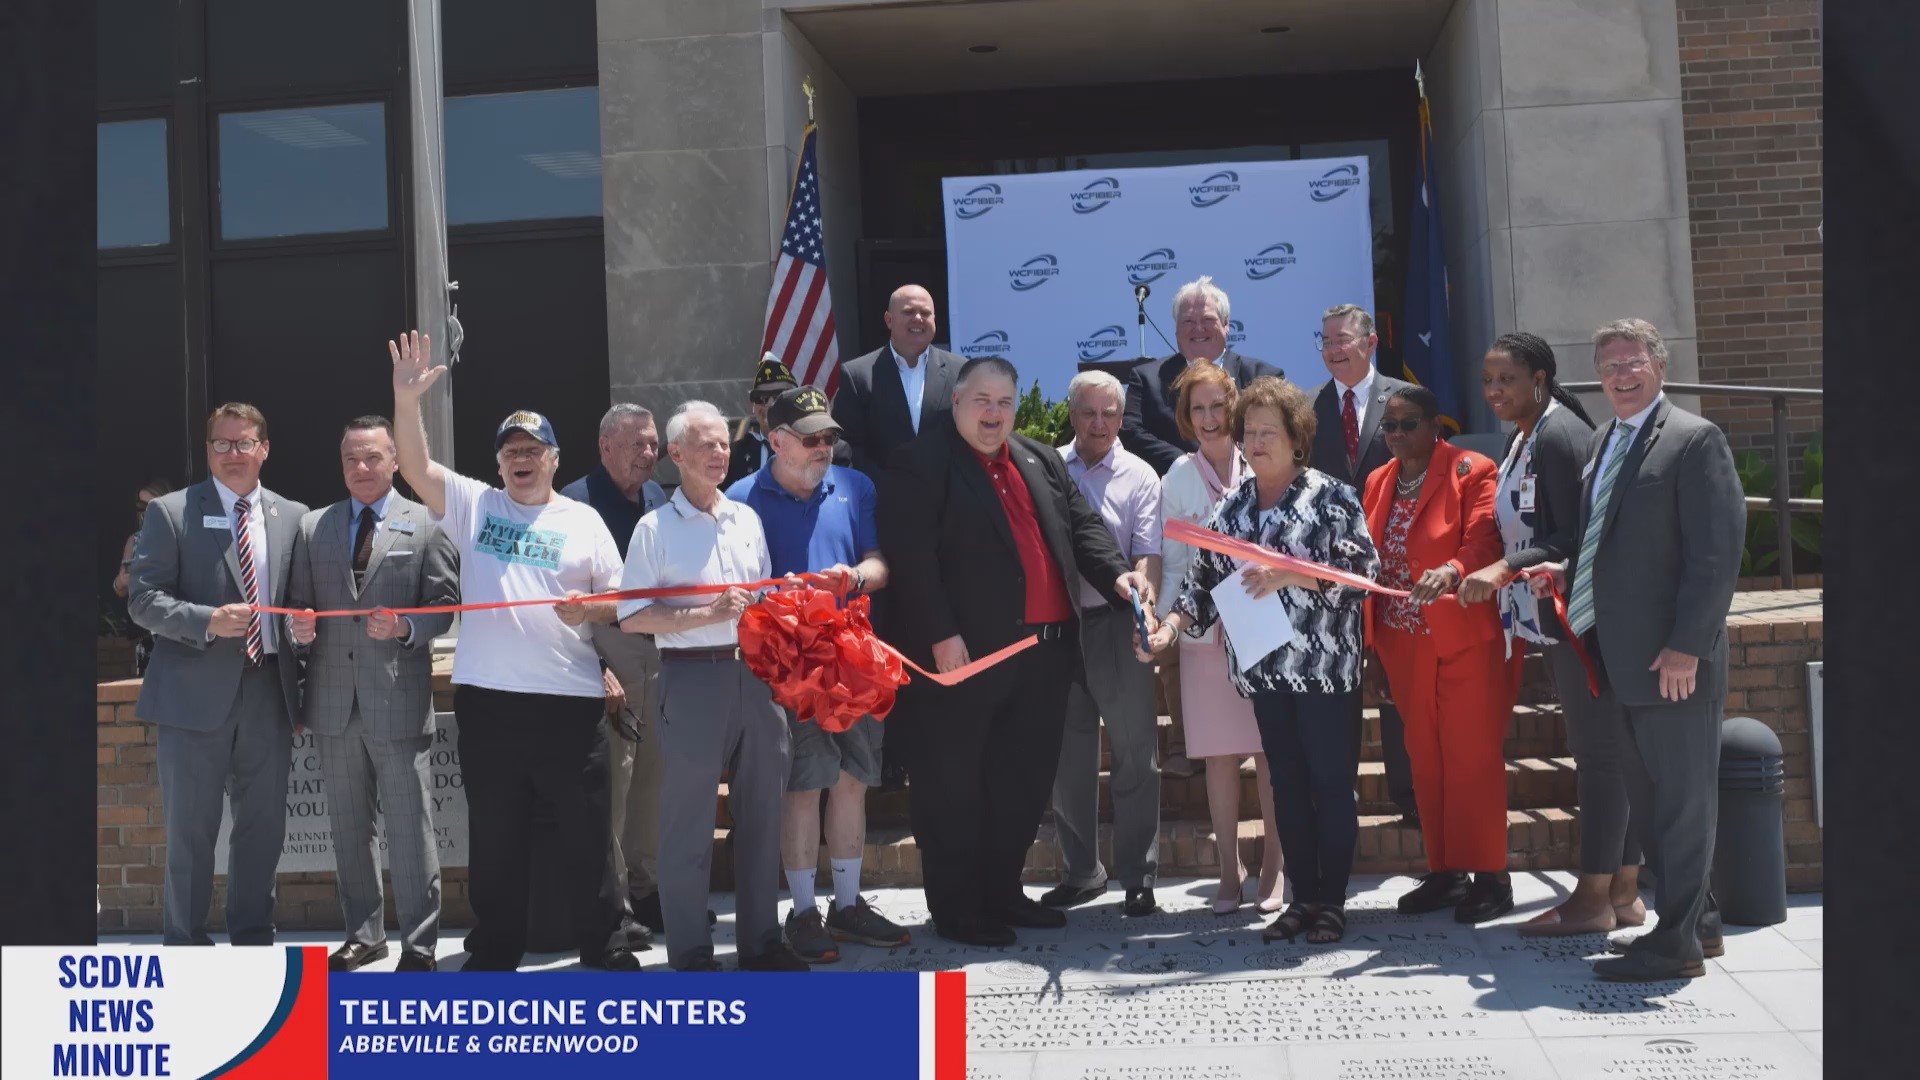 Two new telemedicine centers have opened in Abbeville and Greenwood.